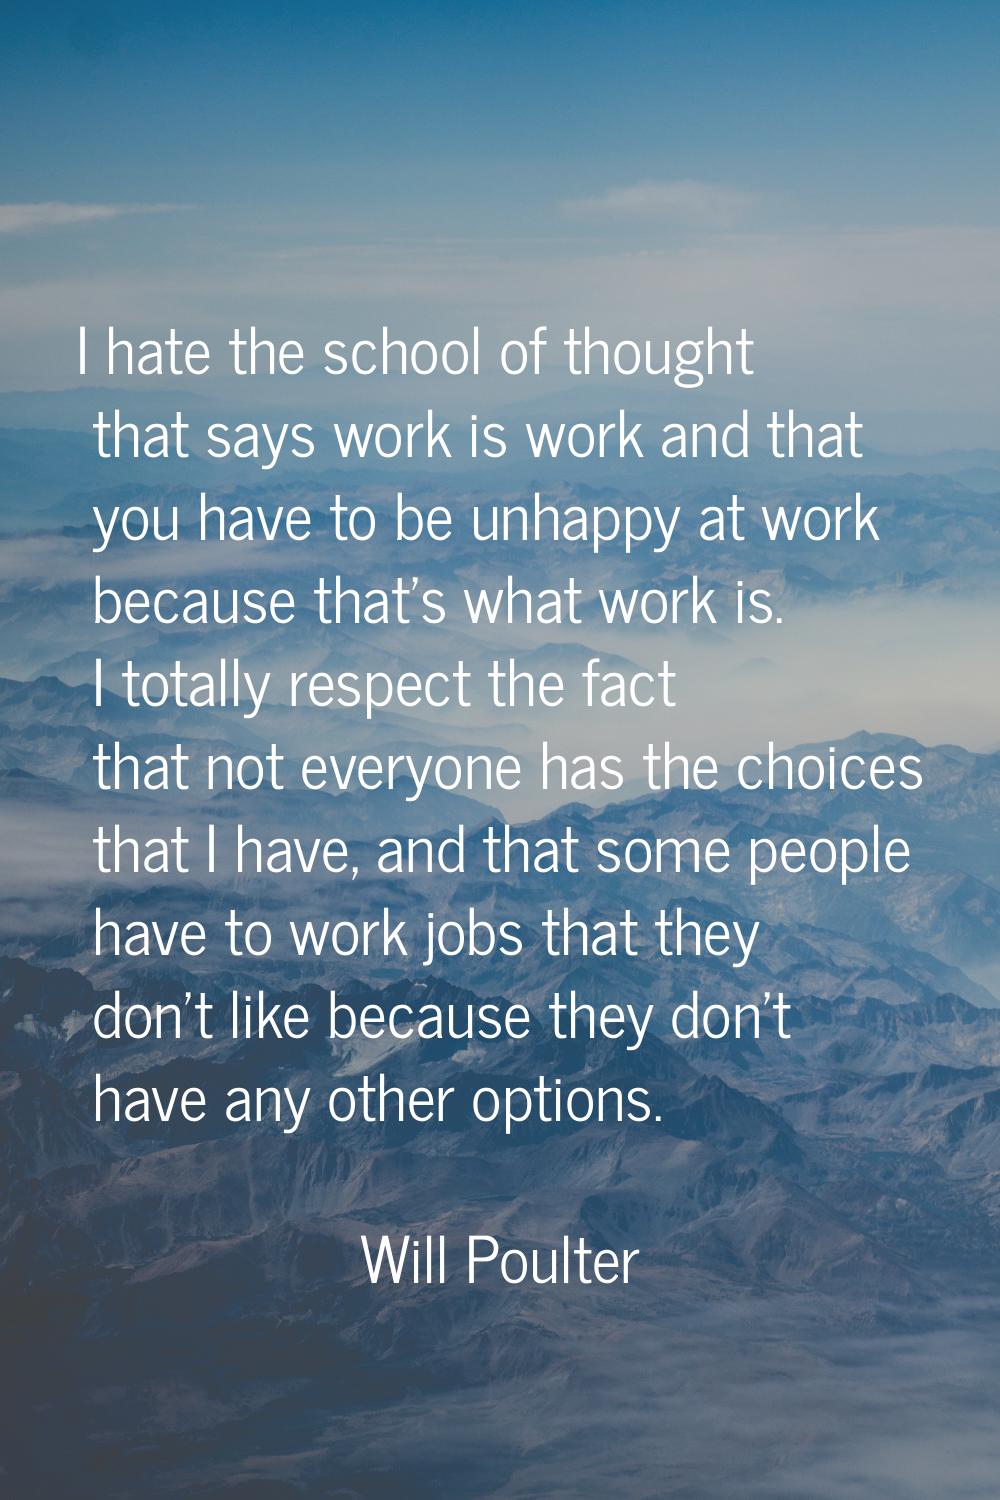 I hate the school of thought that says work is work and that you have to be unhappy at work because